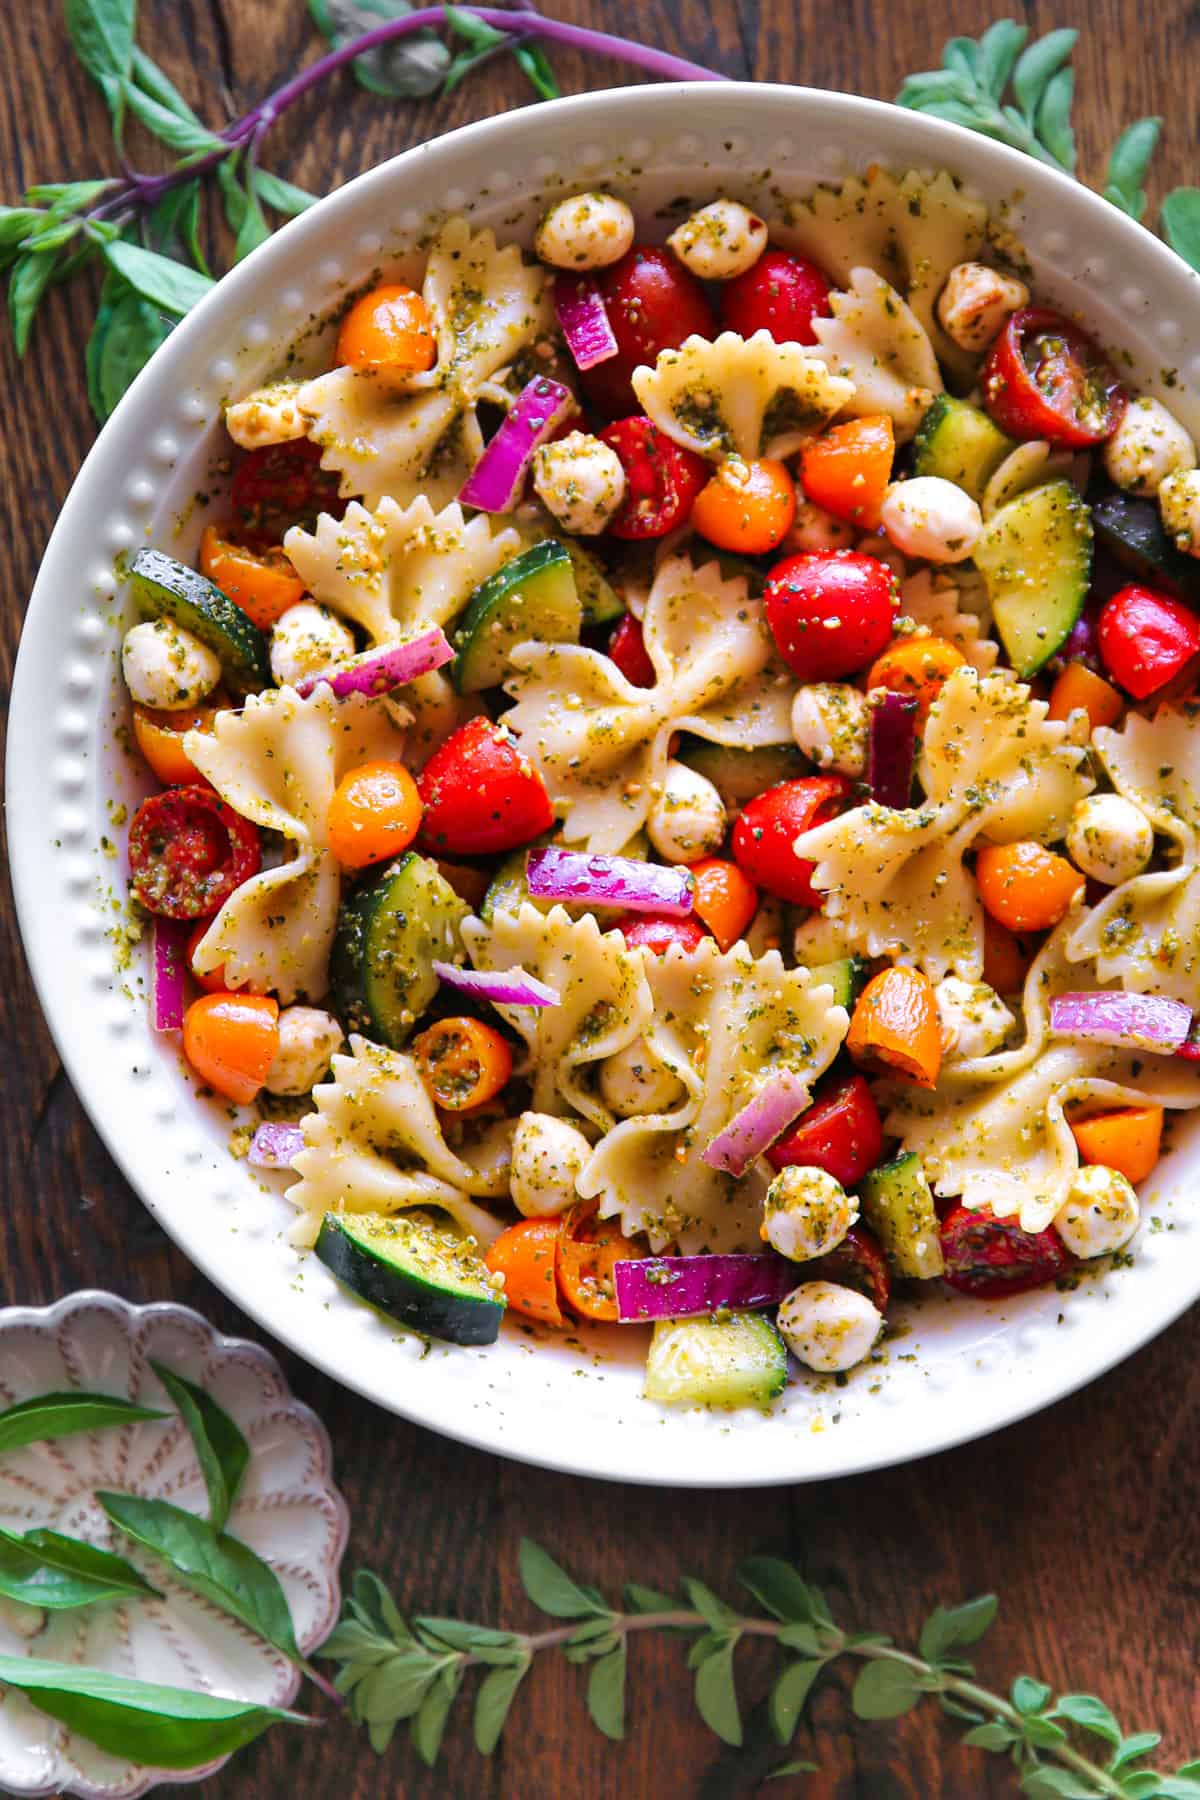 Pesto Pasta Salad with Cherry Tomatoes, Cucumber, Red Onion, and Mozzarella cheese - in a white bowl.